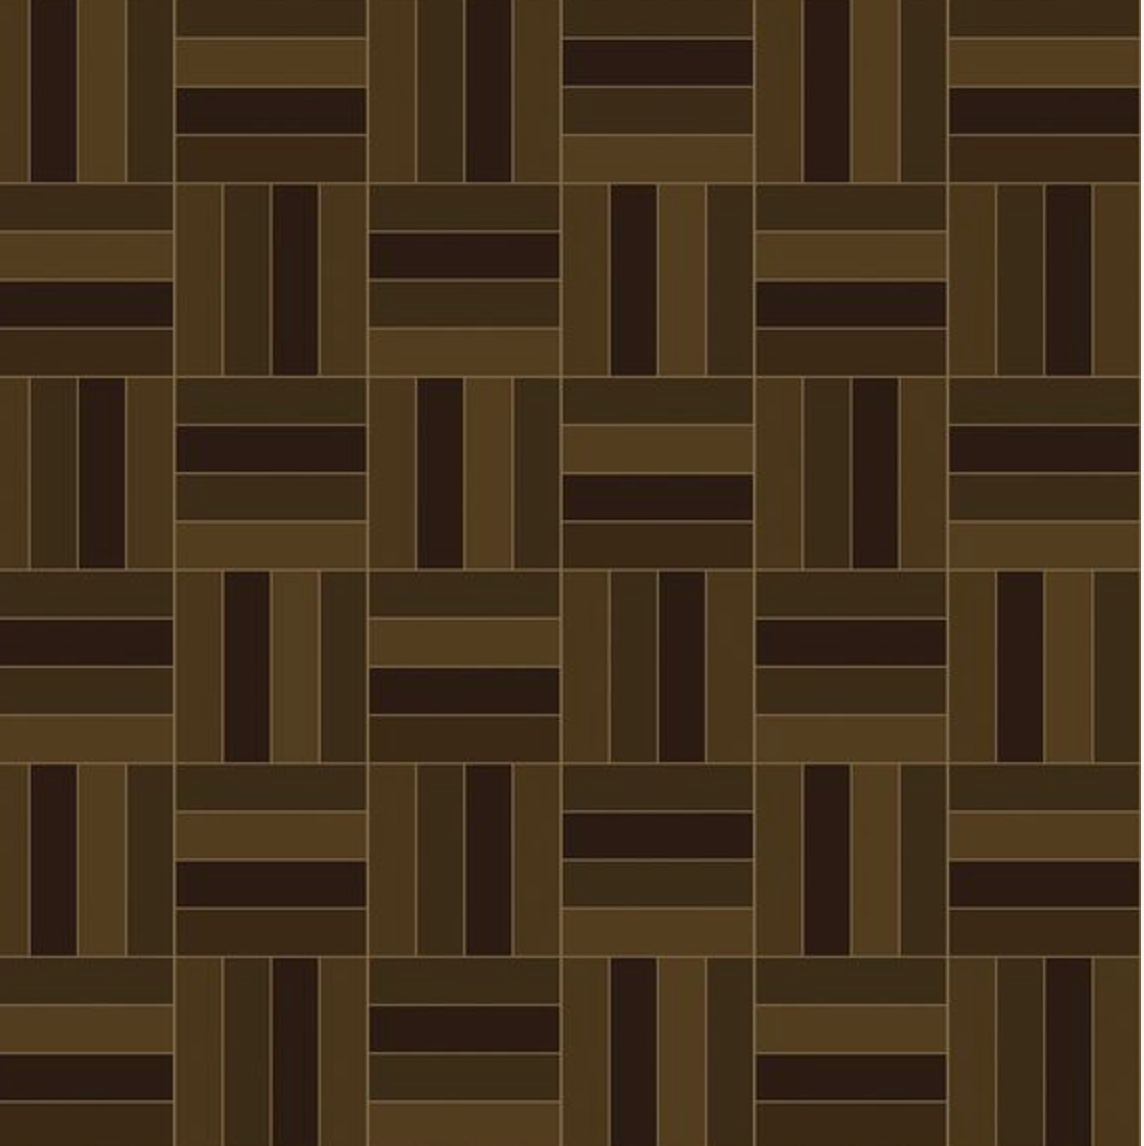 Showerwall Acrylic Patterns & Tiles Collection - Square Parquet Bronze